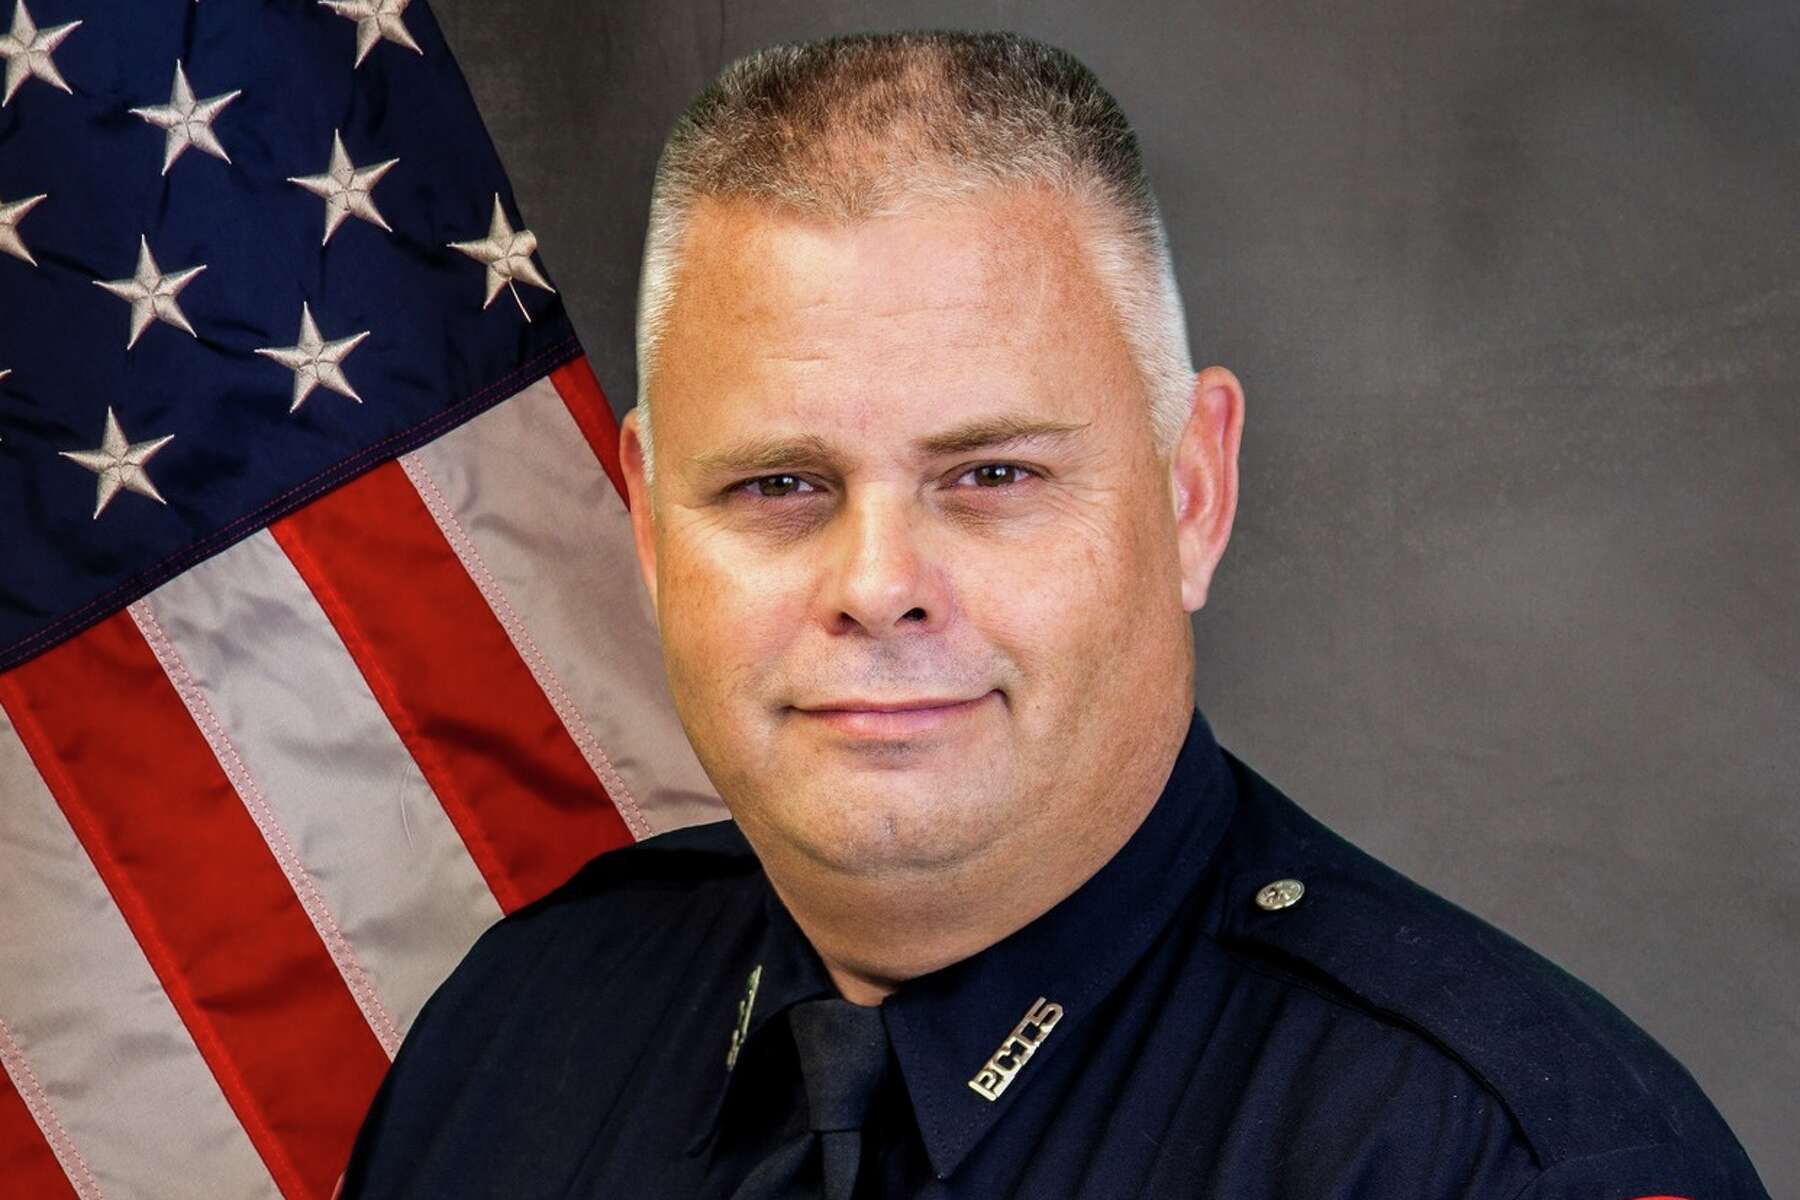 Houston Police Officer Shot to Death During Early Morning Traffic Stop